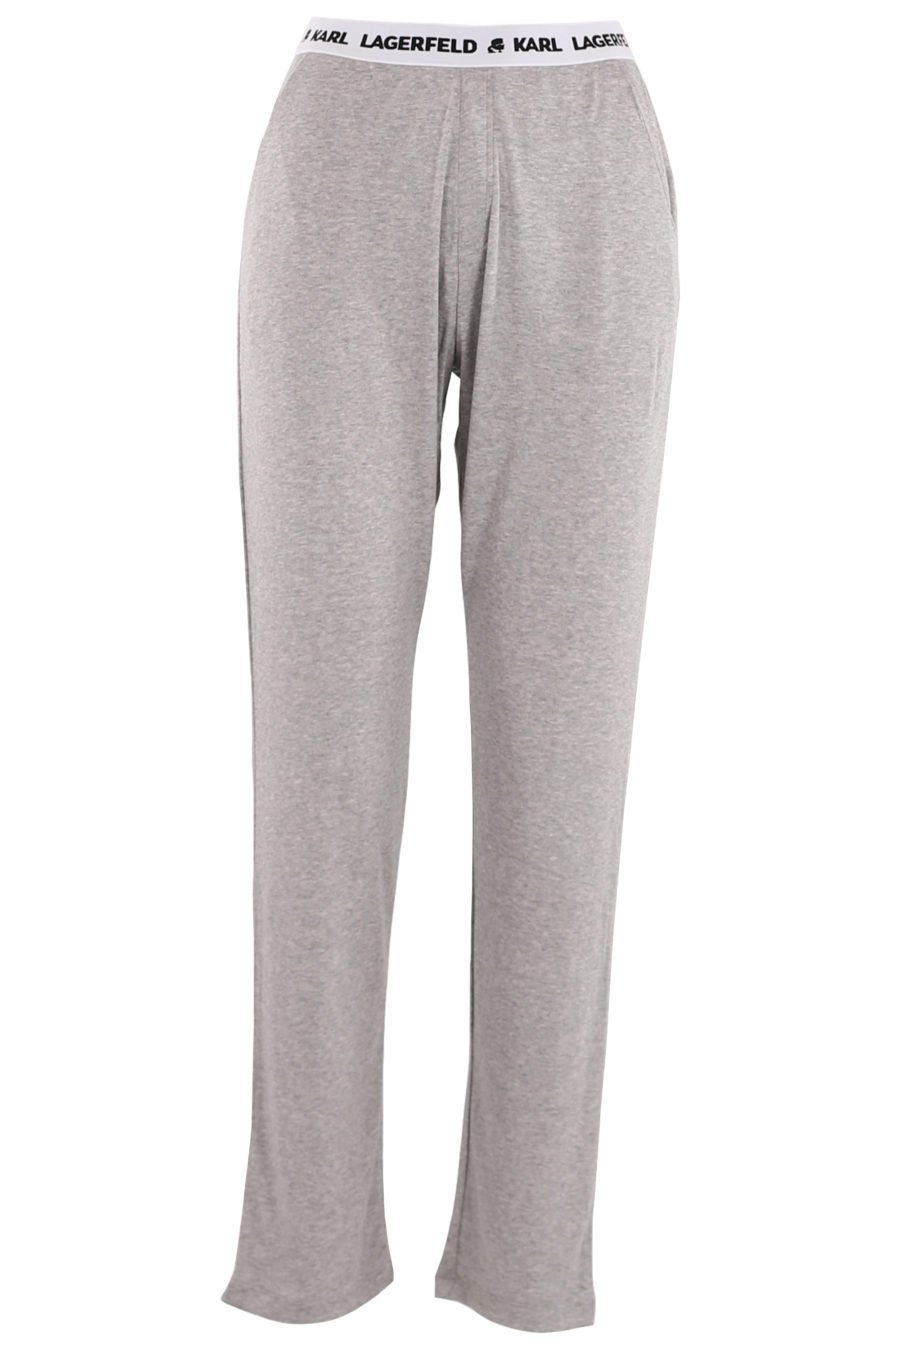 Grey unisex trousers with logo - e9cde30eef31c4e5fa9af2a675484821613f5af6a4